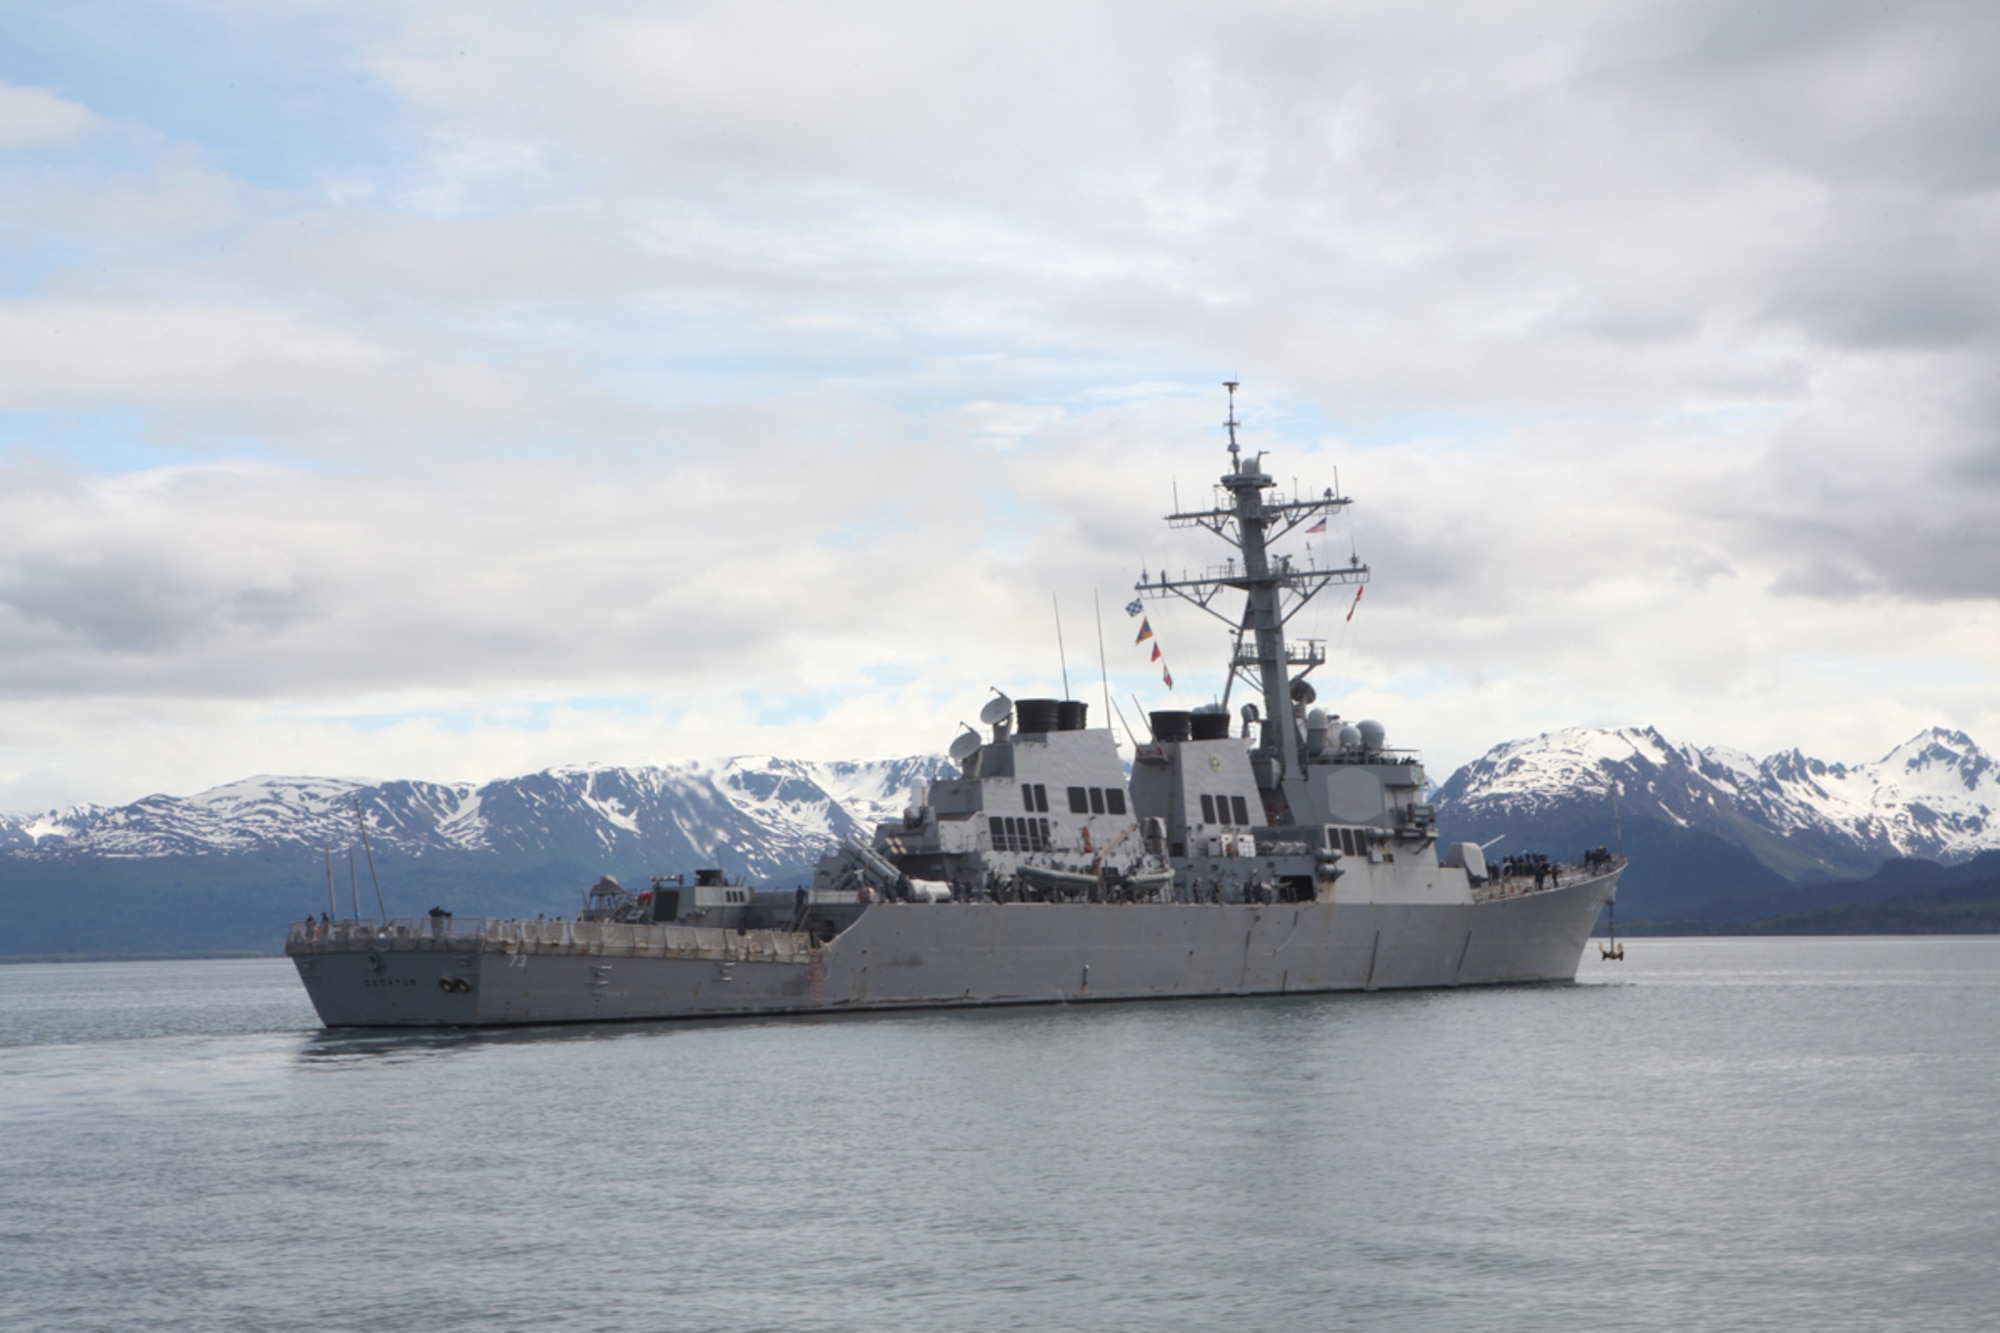 HOMER, Alaska - The USS Decatur (DDG-73) sits docked in Homer, Alaska, before the start of Exercise Northern Edge '11, June 12, 2011. The Decatur is a Arleigh Burke-class guided-missile destroyer ship, which has SPY radar on board to locate and track aircraft and missiles. (U.S. Marines photo/Sgt. Deanne Hurla)
